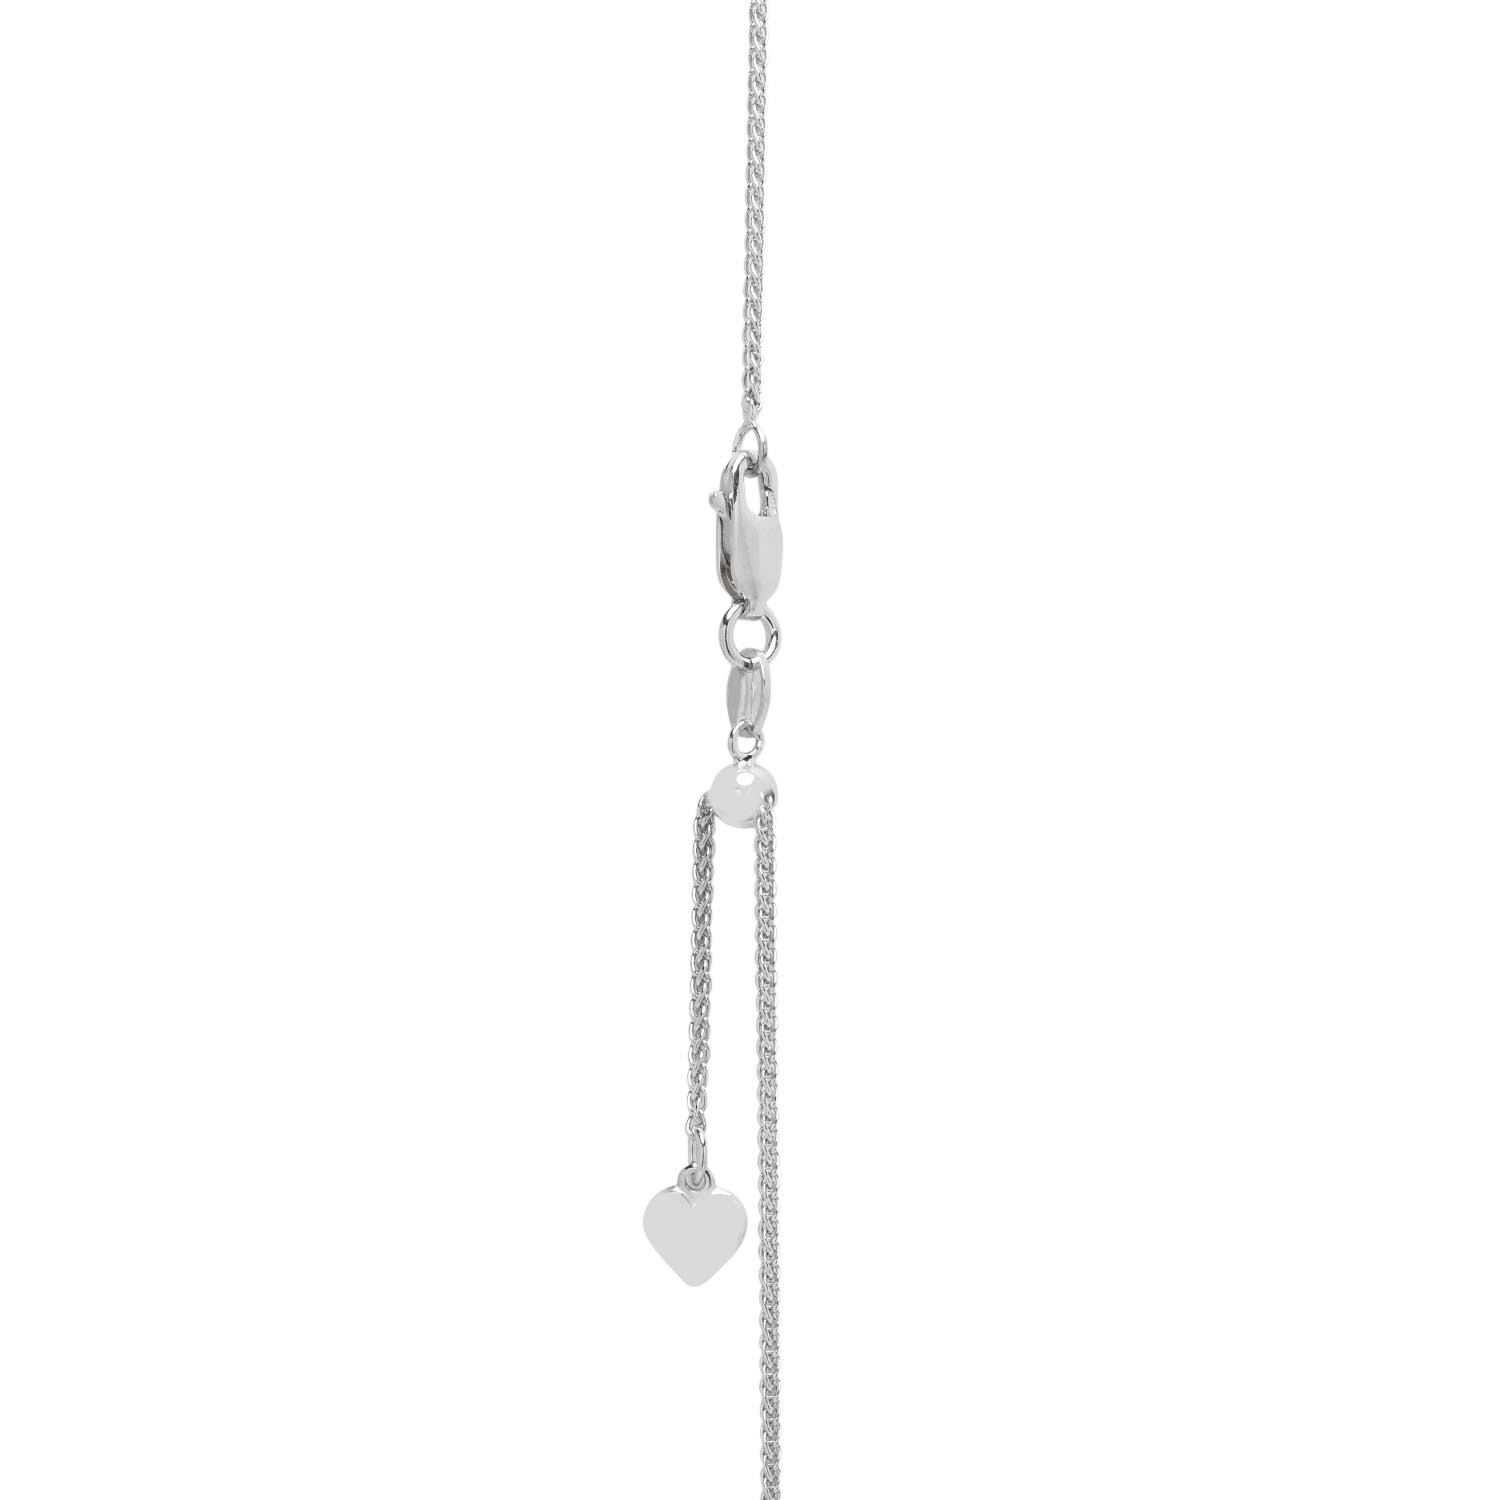 Adjustable Wheat Chain in Sterling Silver (26inches and 1mm wide)